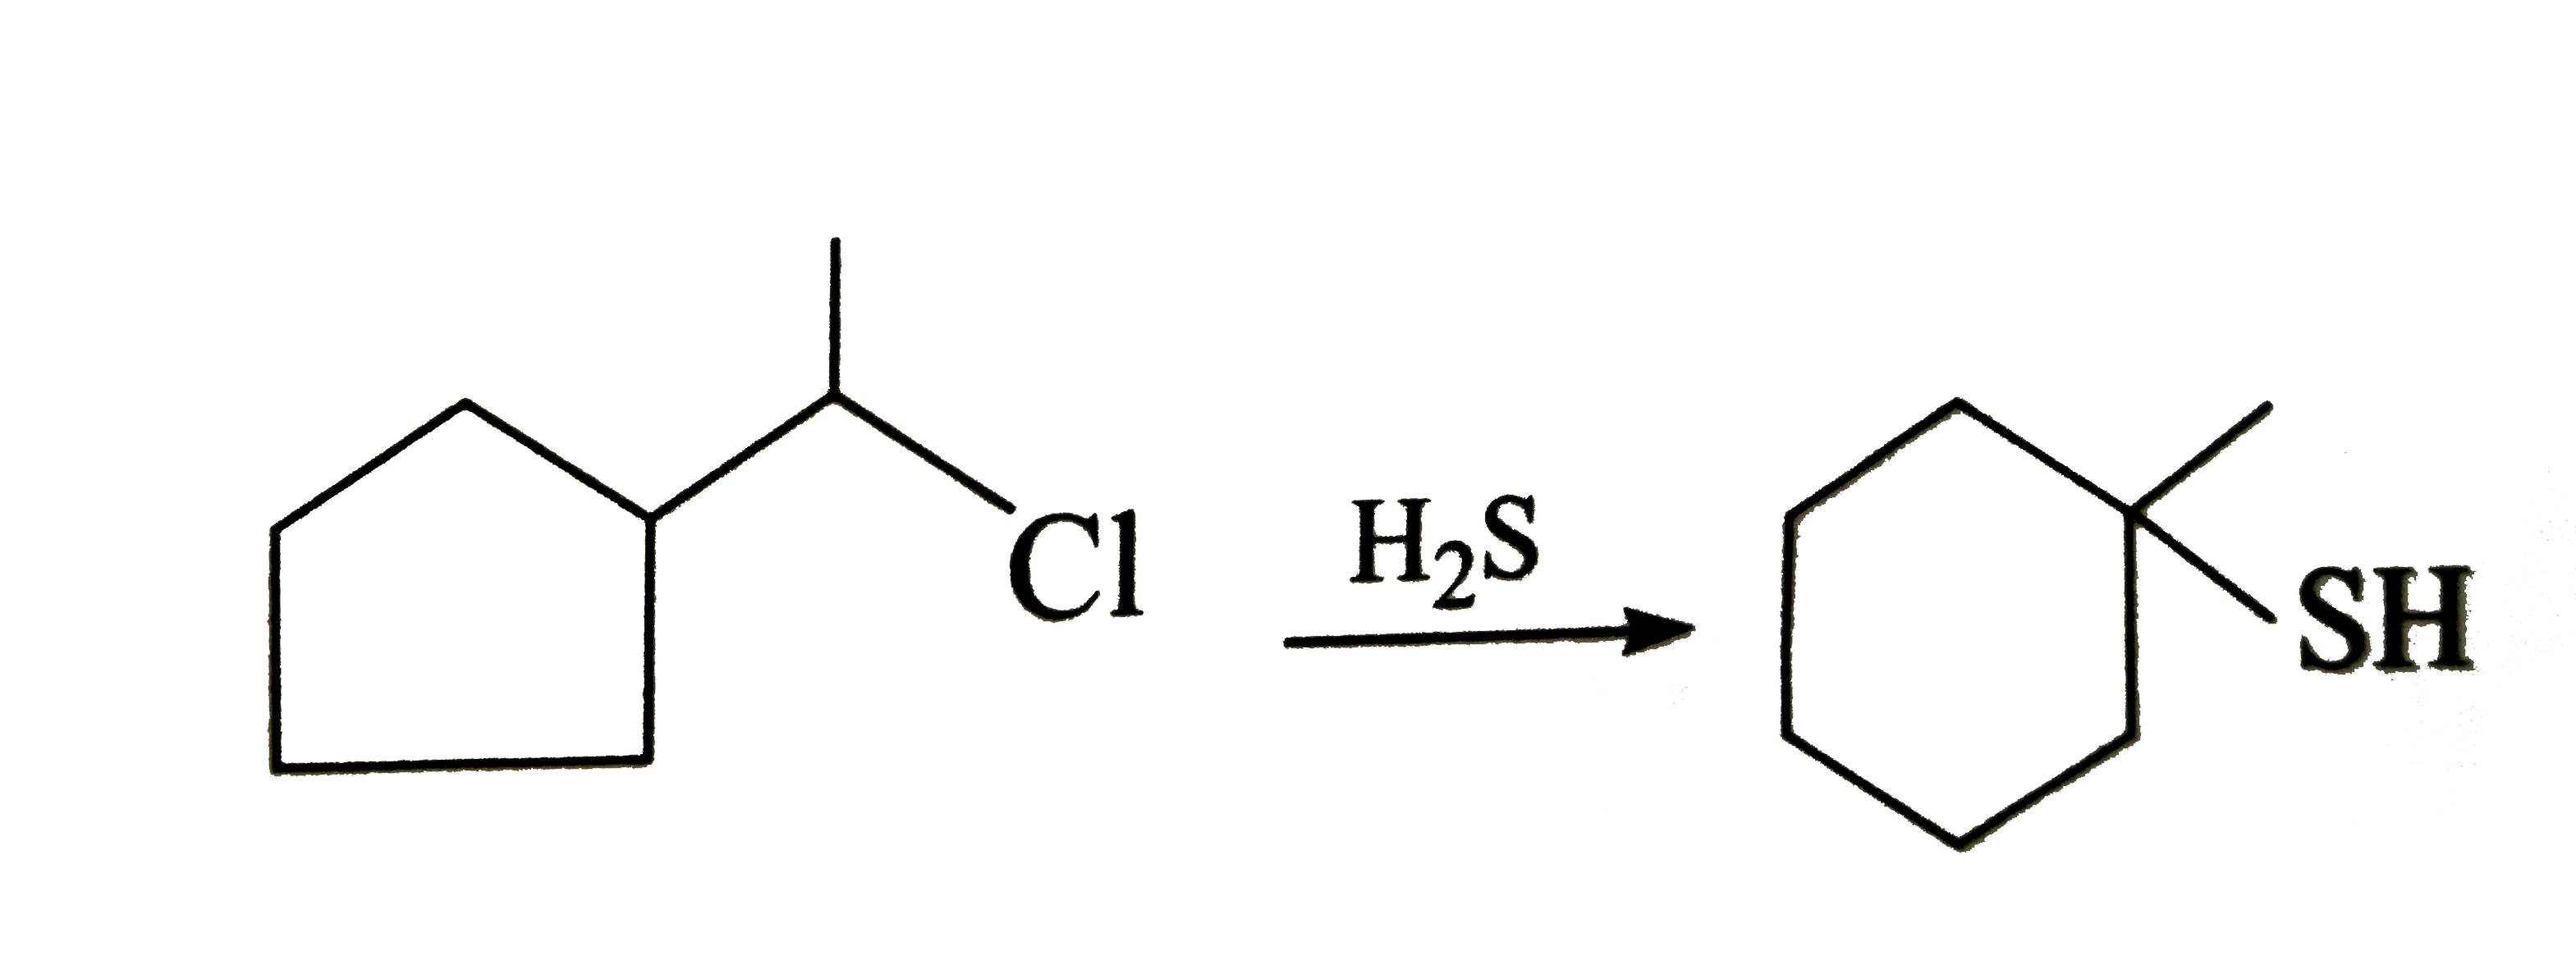 Give possible mechanism of the given reaction using carbocation rearrangement.